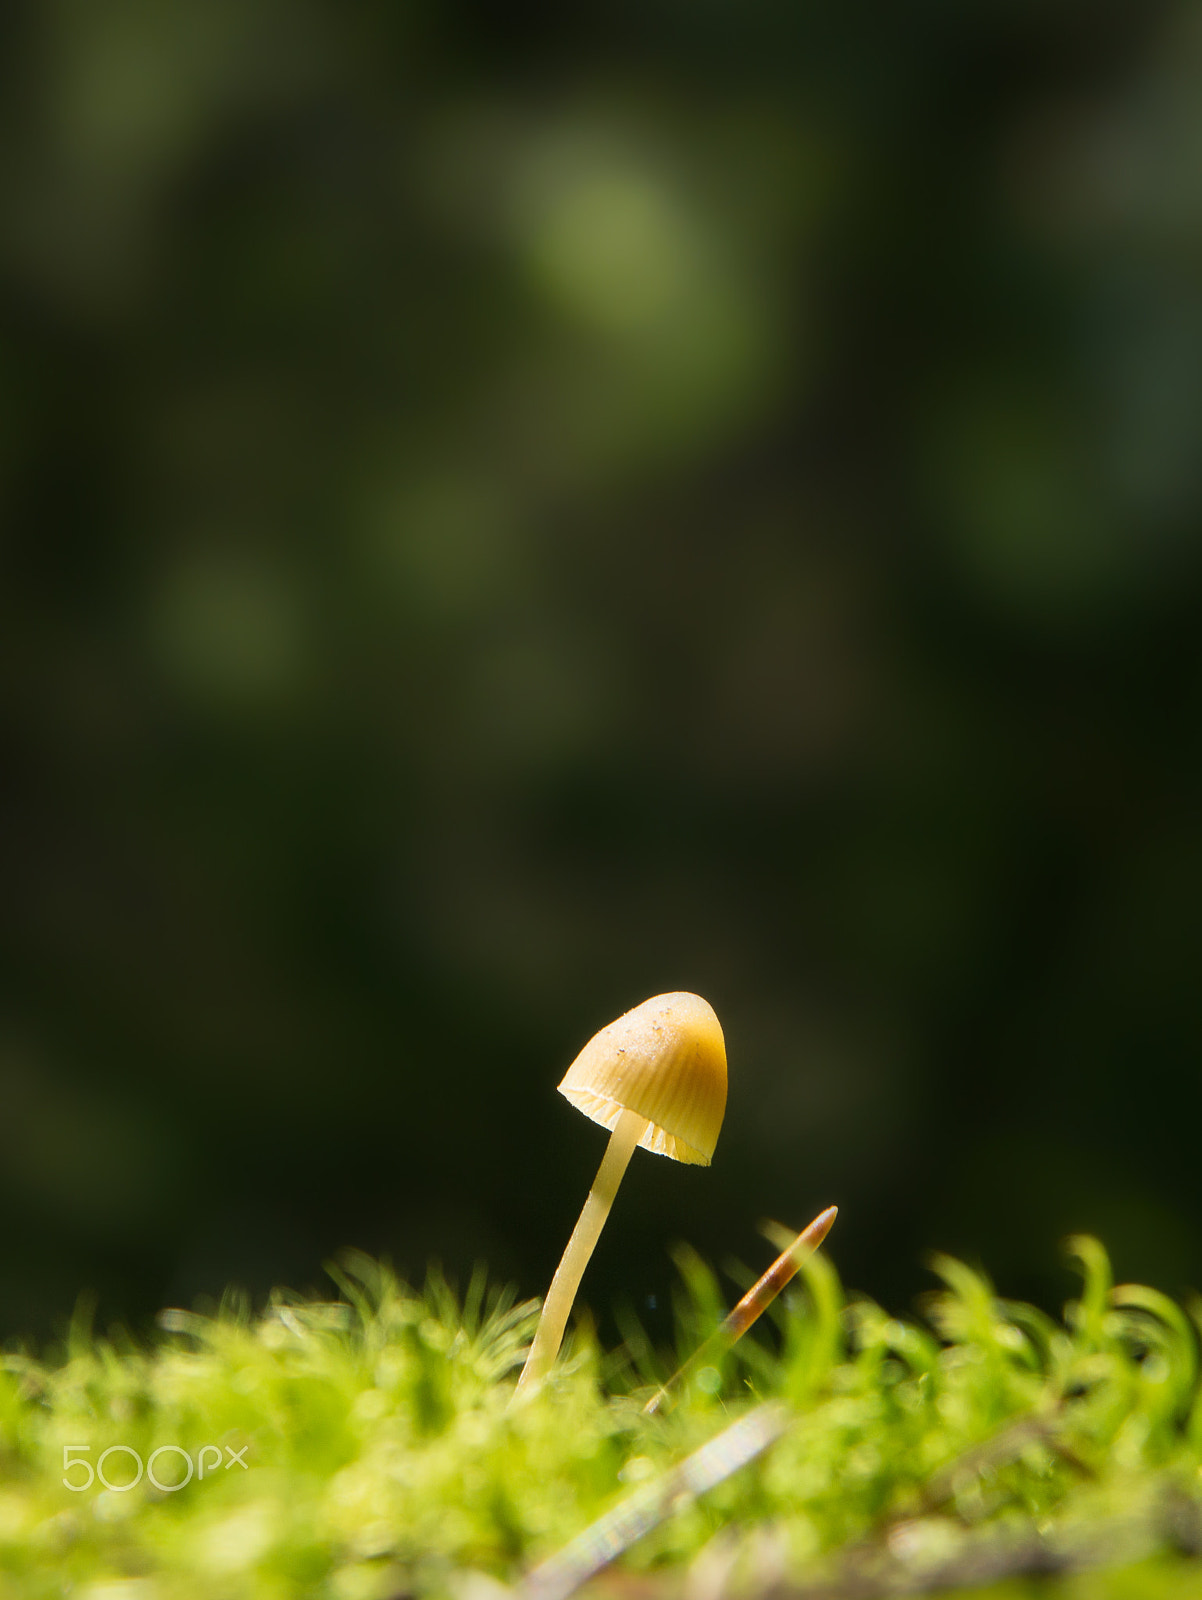 Sony SLT-A65 (SLT-A65V) sample photo. Small lamellar mushroom on a green moss in a forest, lit by a sunbeam, tilted to the right photography